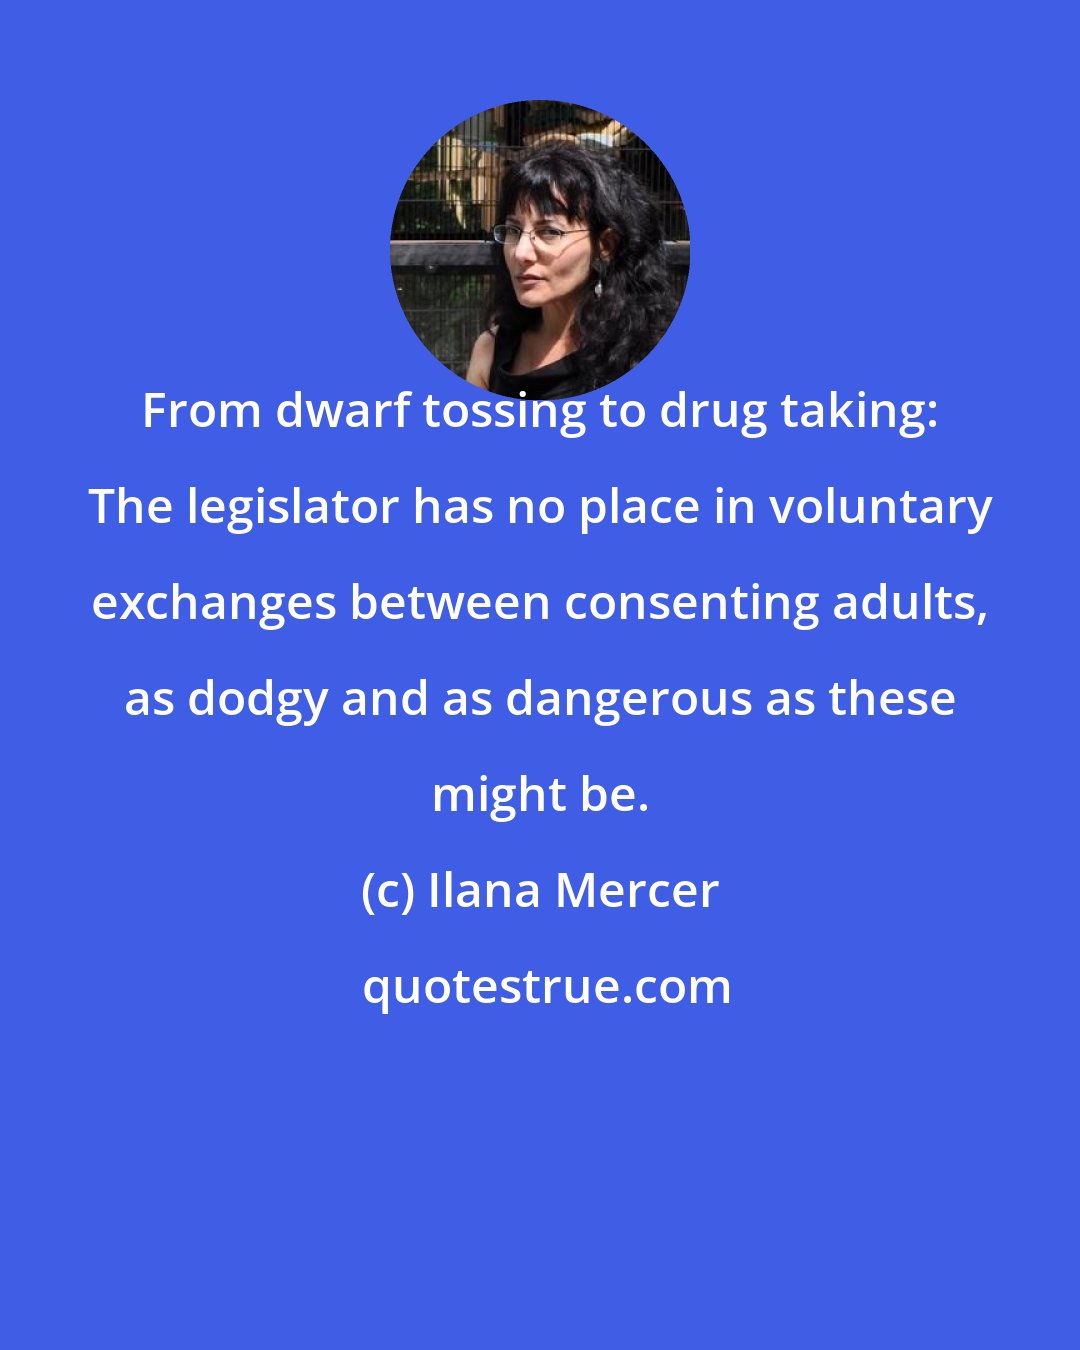 Ilana Mercer: From dwarf tossing to drug taking: The legislator has no place in voluntary exchanges between consenting adults, as dodgy and as dangerous as these might be.